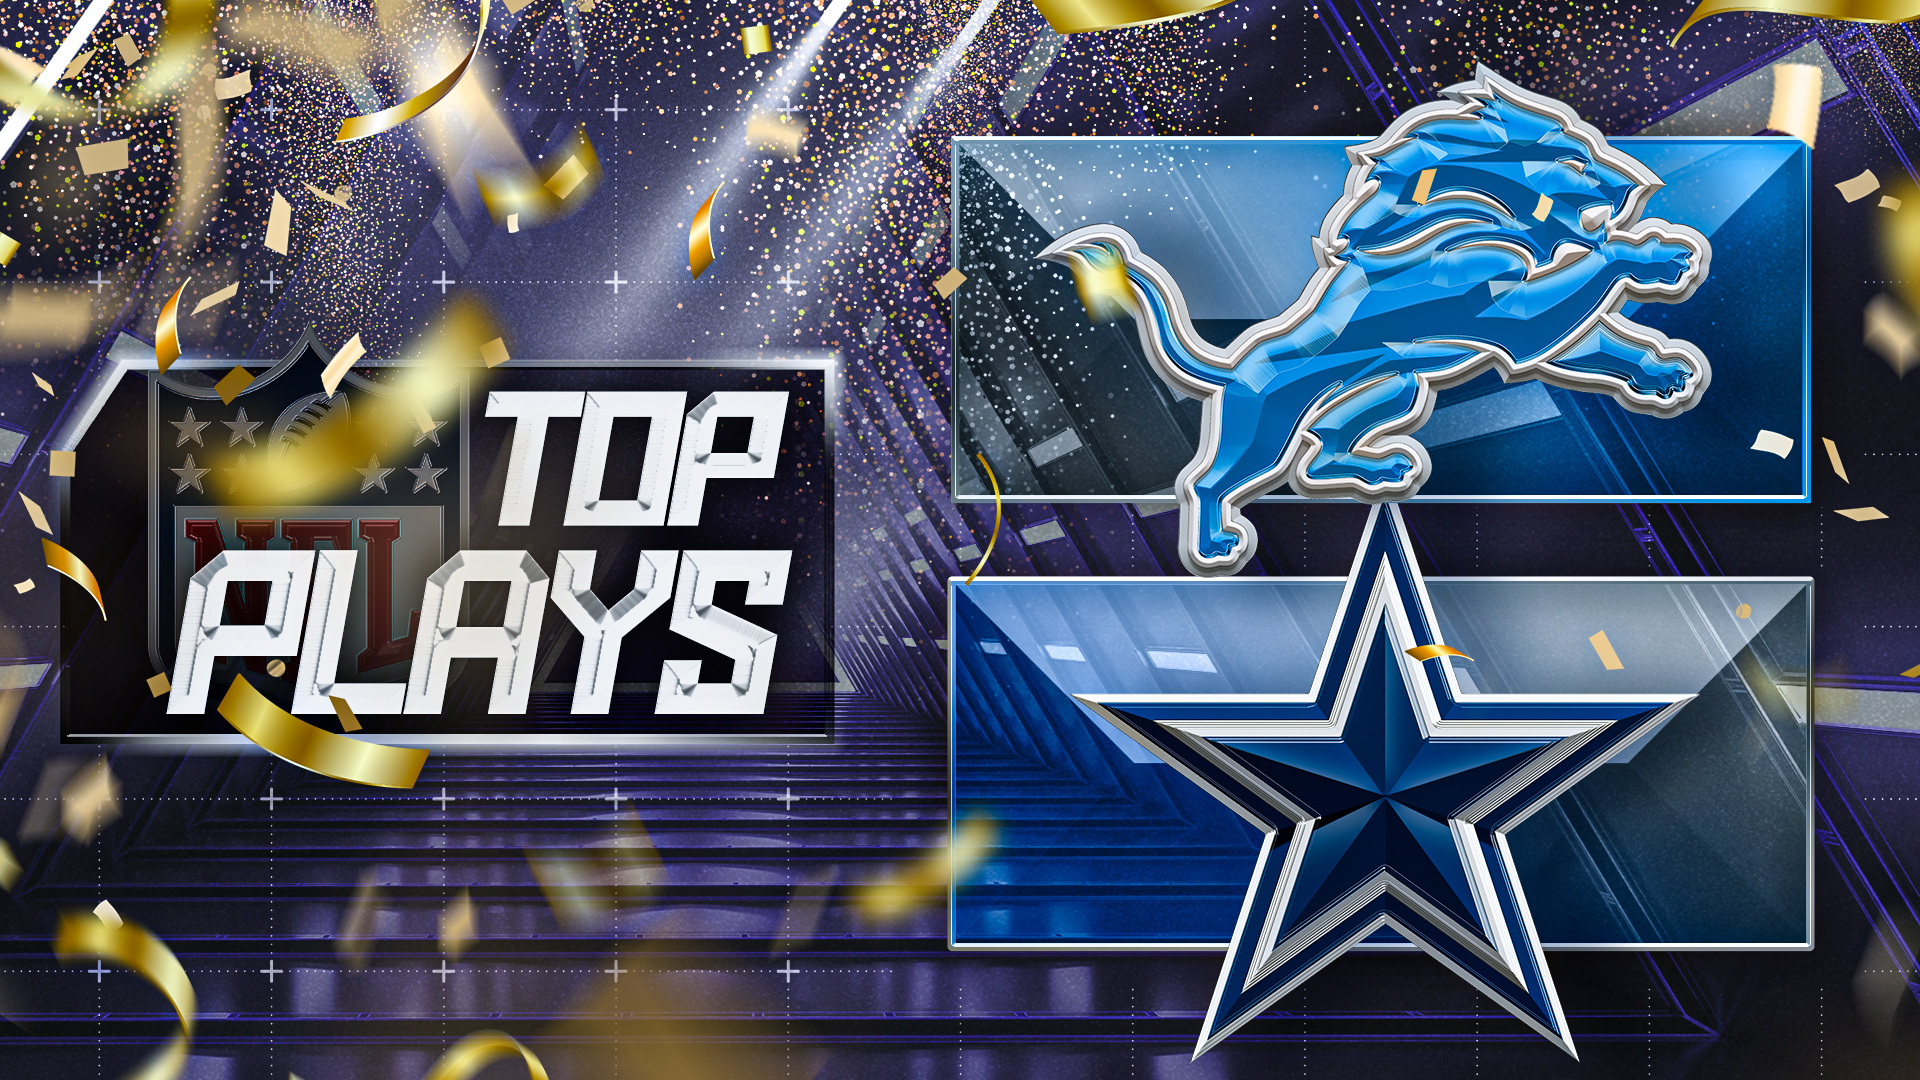 NFL Week 17 highlights: Cowboys edge Lions in controversial finish